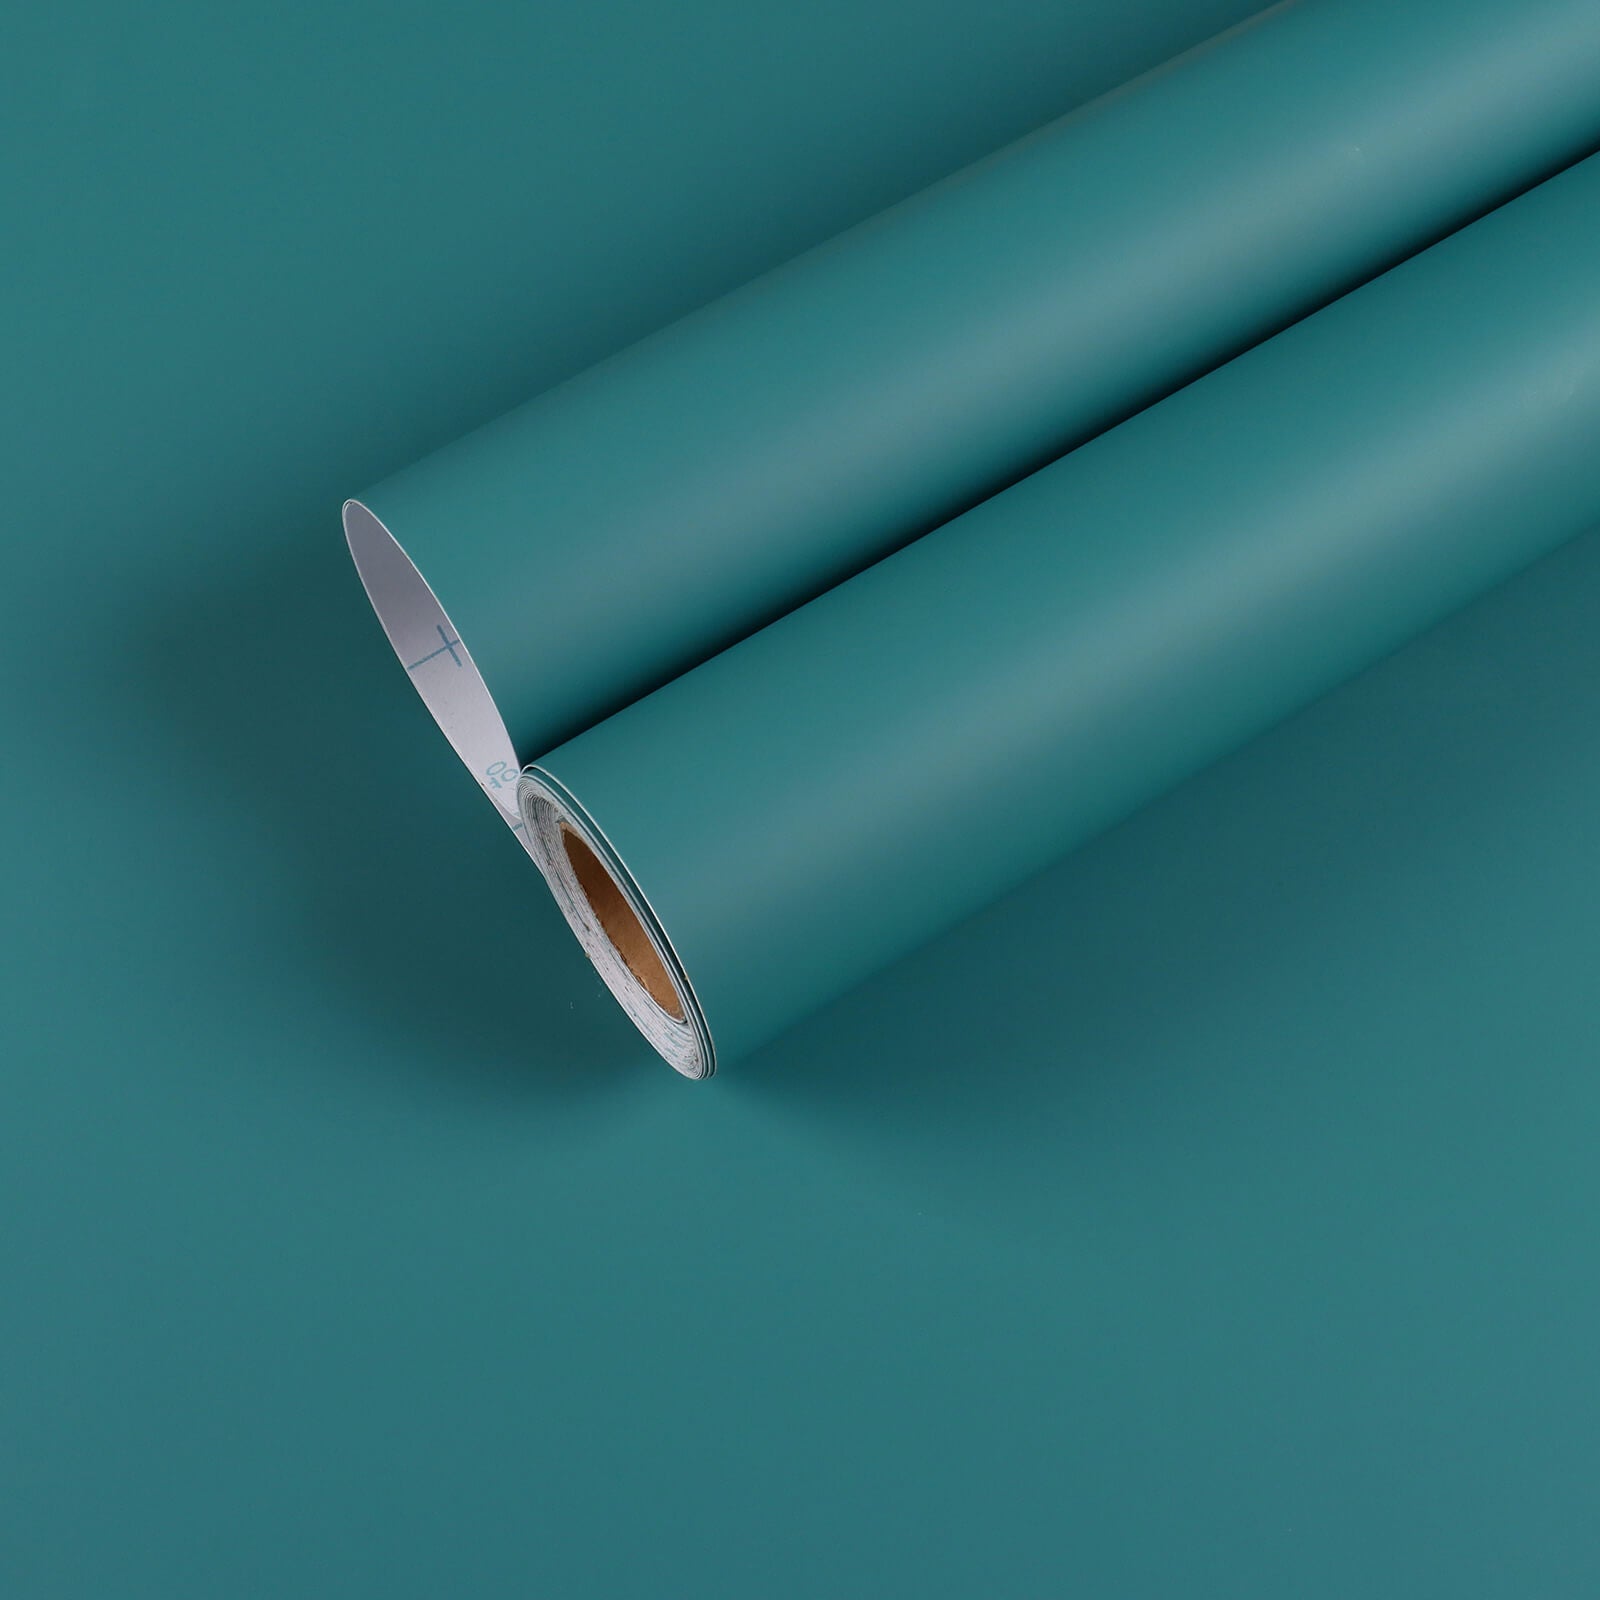    chihut-teal-blue-wallpaper-peel-and-stick